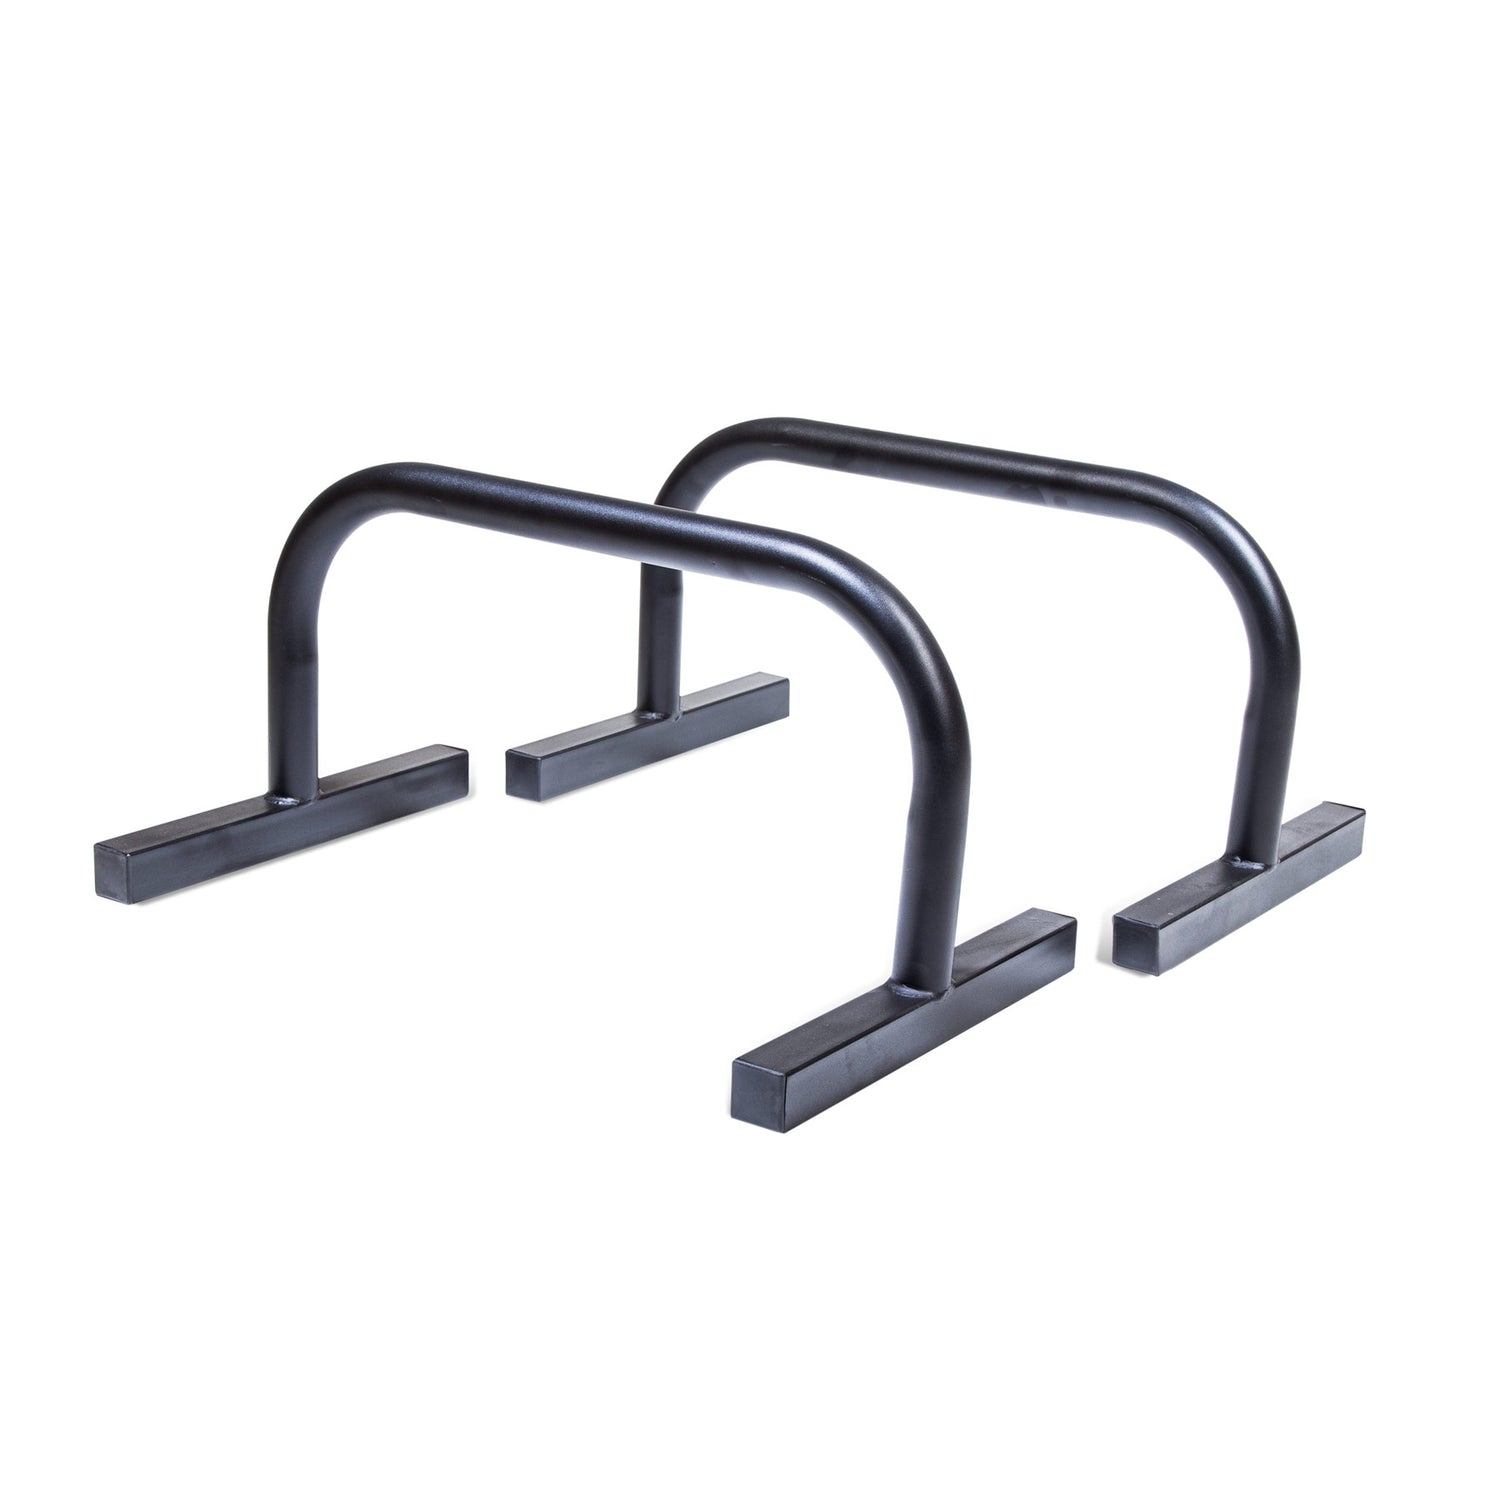 a pair of black parallel bars